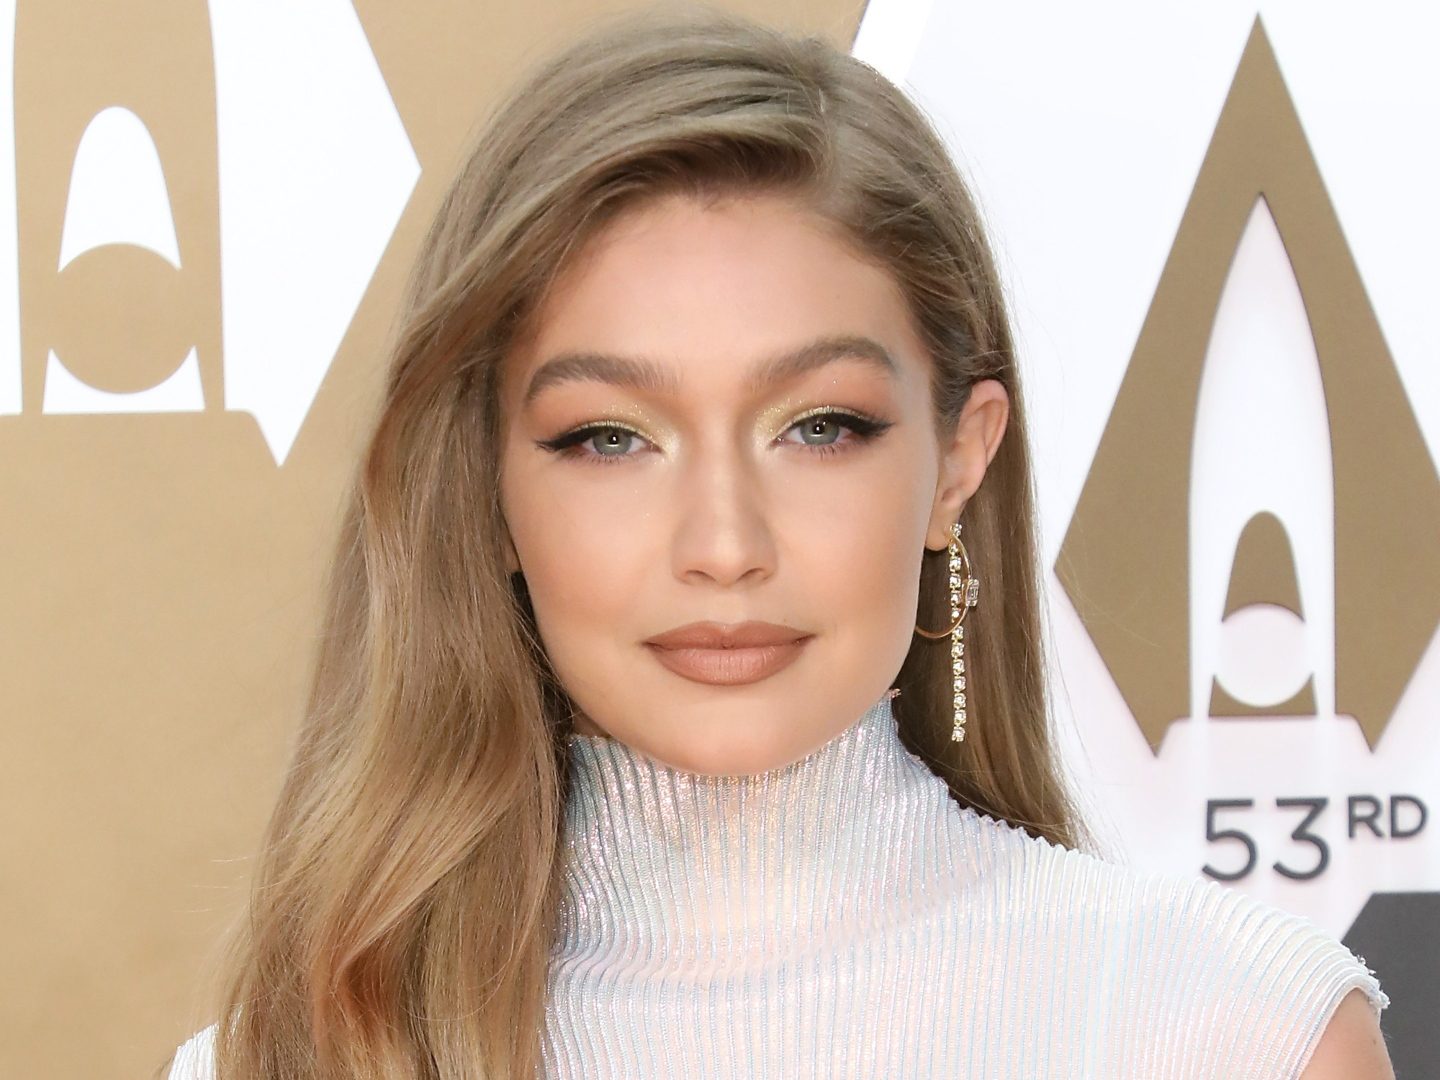 Gigi Hadid Debuted Her Dramatic New Hairdo Right Before Her Alleged